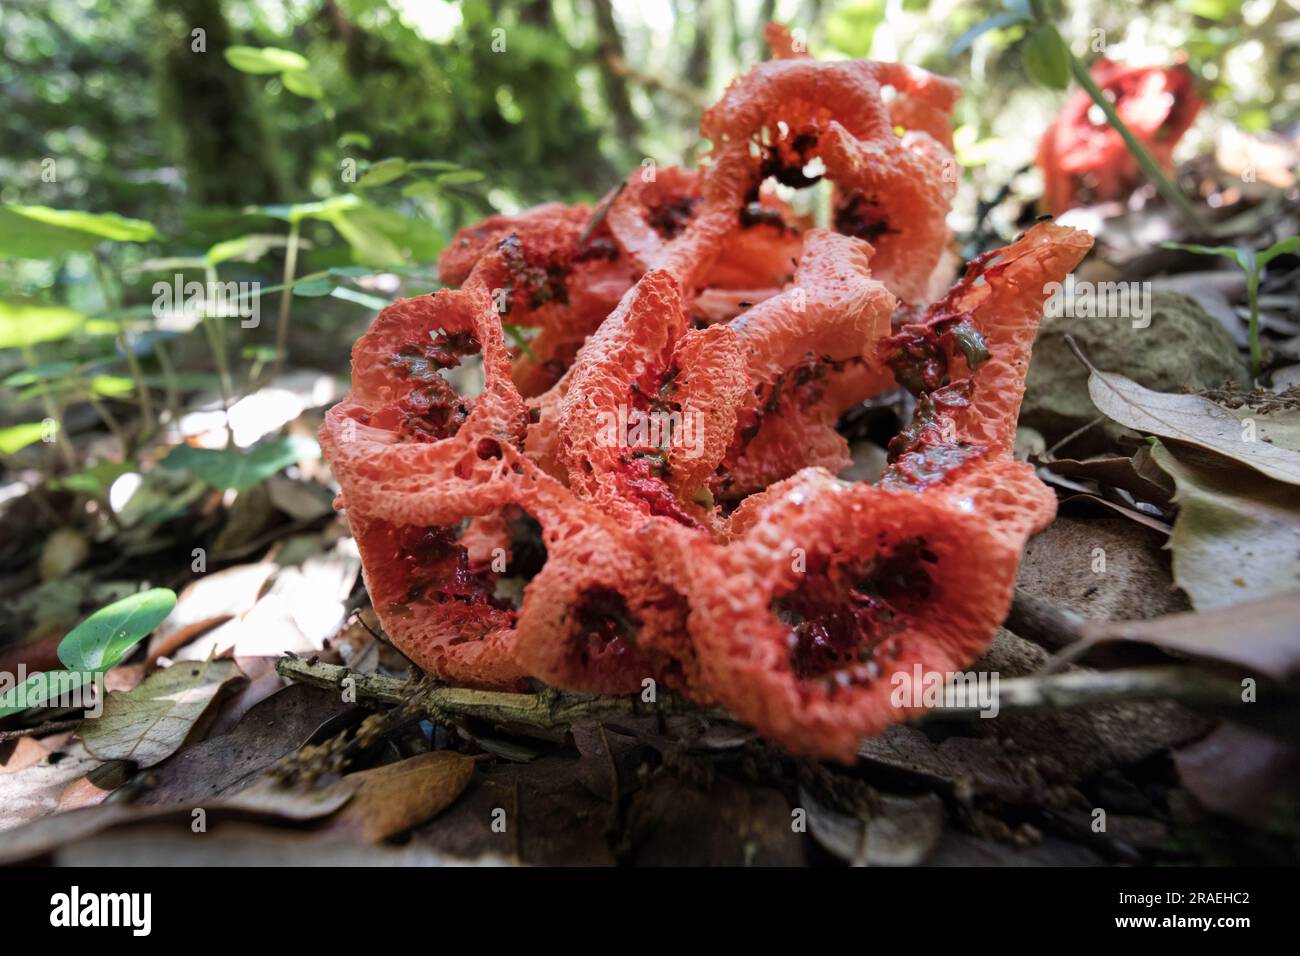 Latticed Stinkhorn Fungus (Clathrus ruber), also known as the Basket or Red Cage Fungus, Woodland Habitat, Ardeche, France Stock Photo